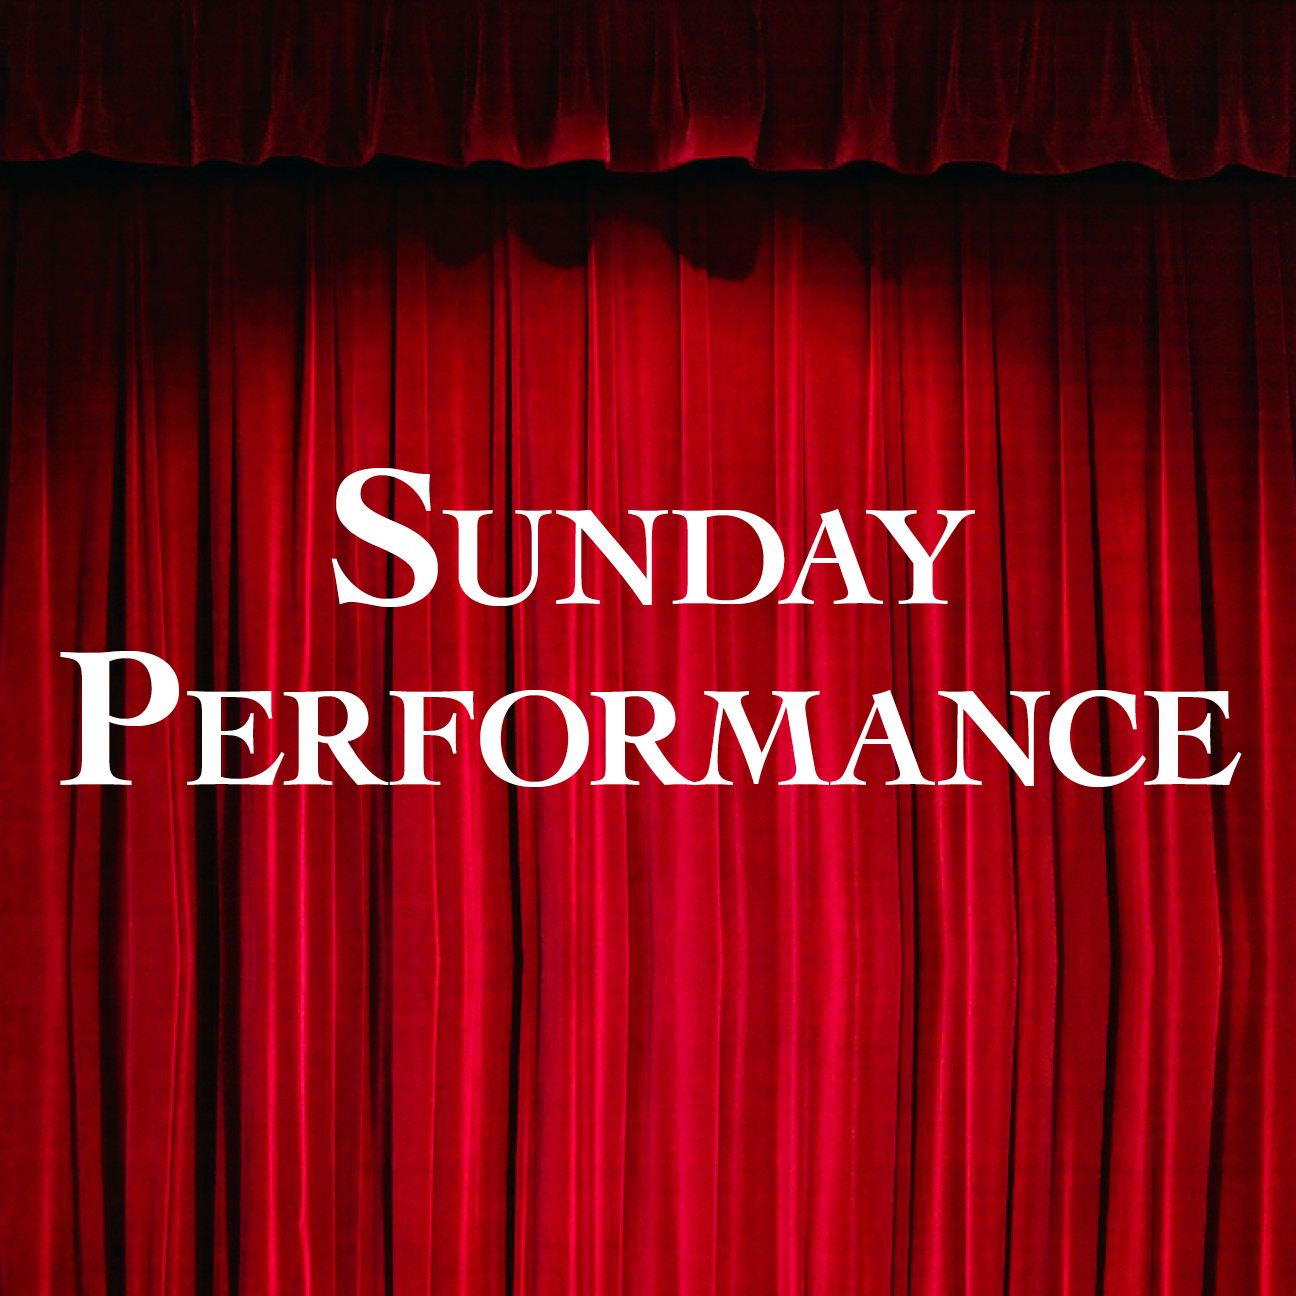 Image of a red curtain that you would find on a stage with a spotlight on it. "Sunday Performance" written over the curtain. 